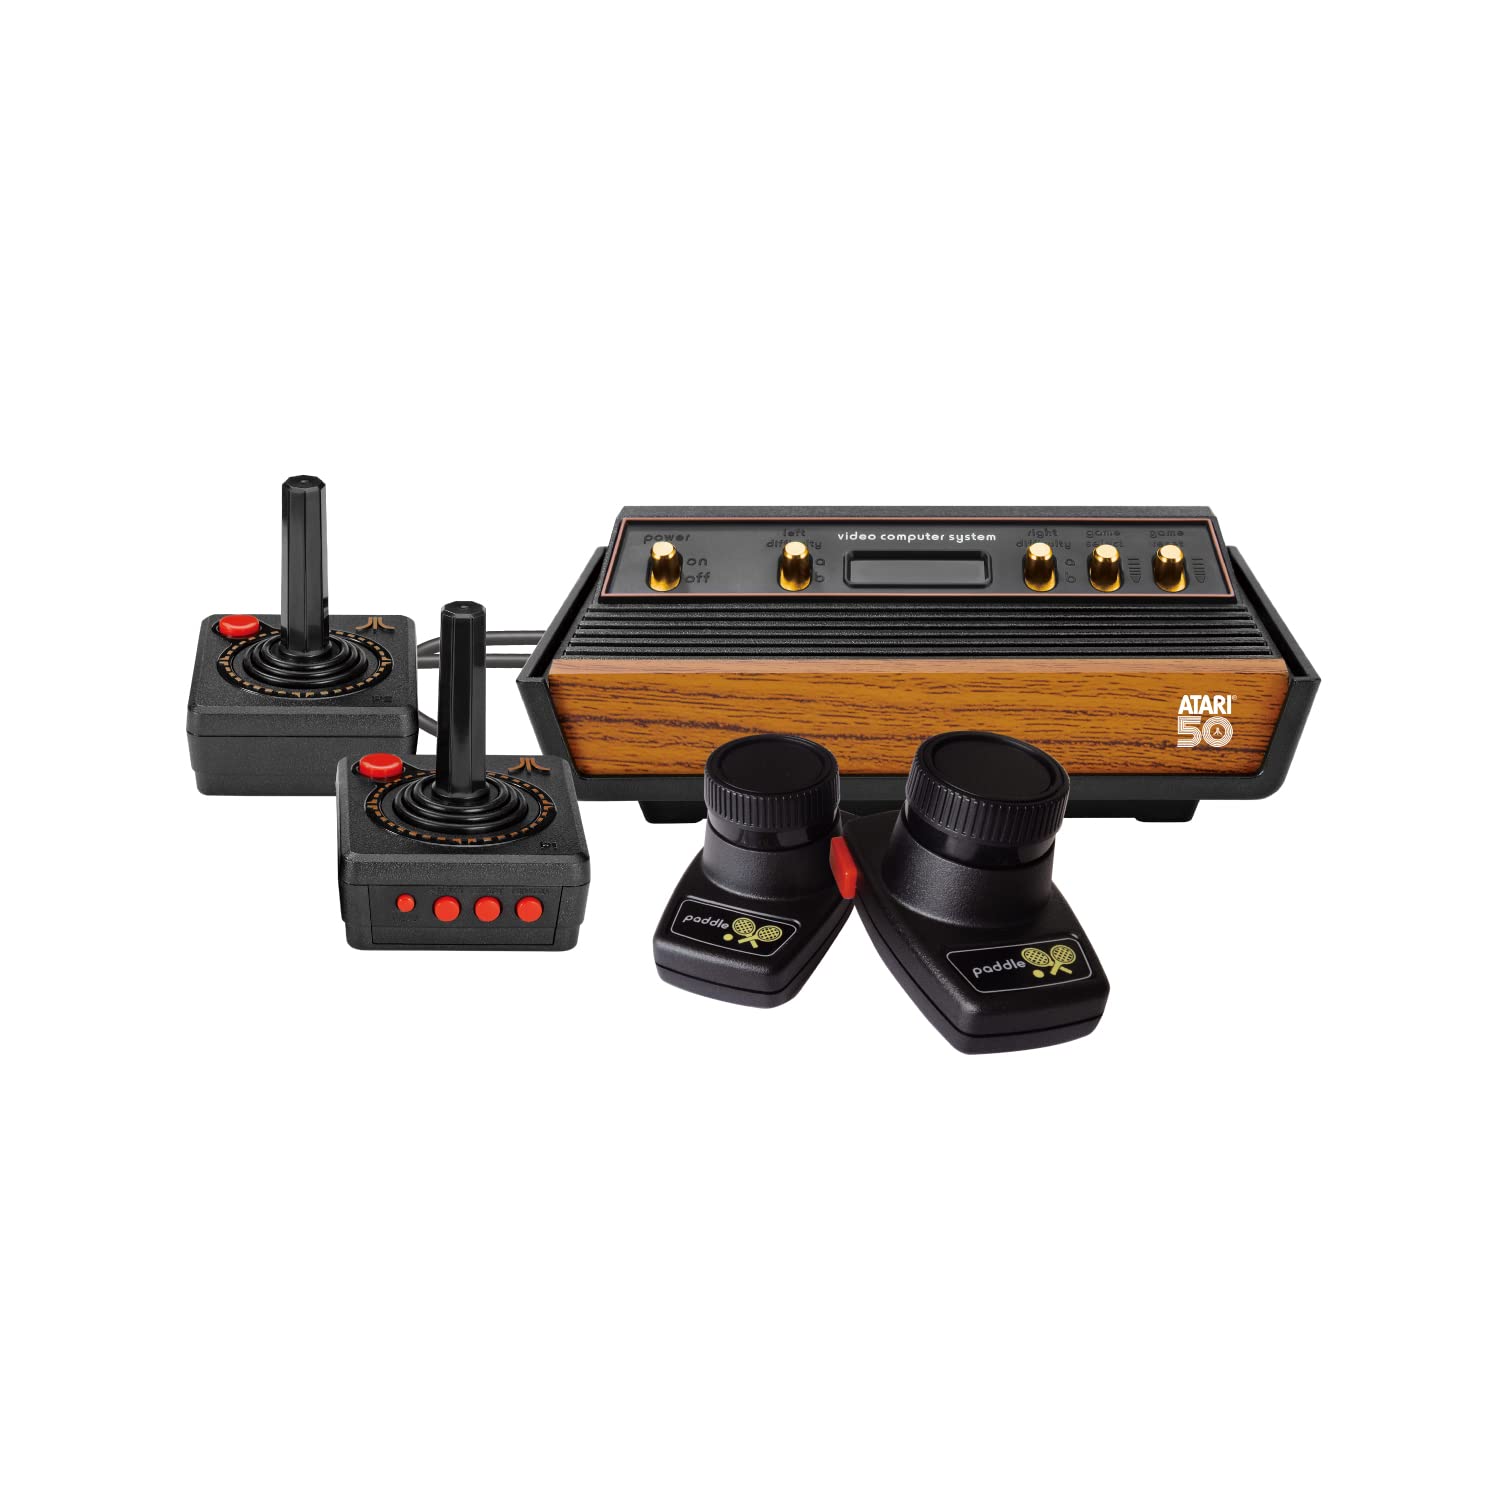 Atari Flashback Gold Console 50th Anniversary Edition, Retro Game Console, Built-in 130 Classic Games, Two Joystick and Paddle Controllers, HDMI, PLUG & PLAY on HD TV